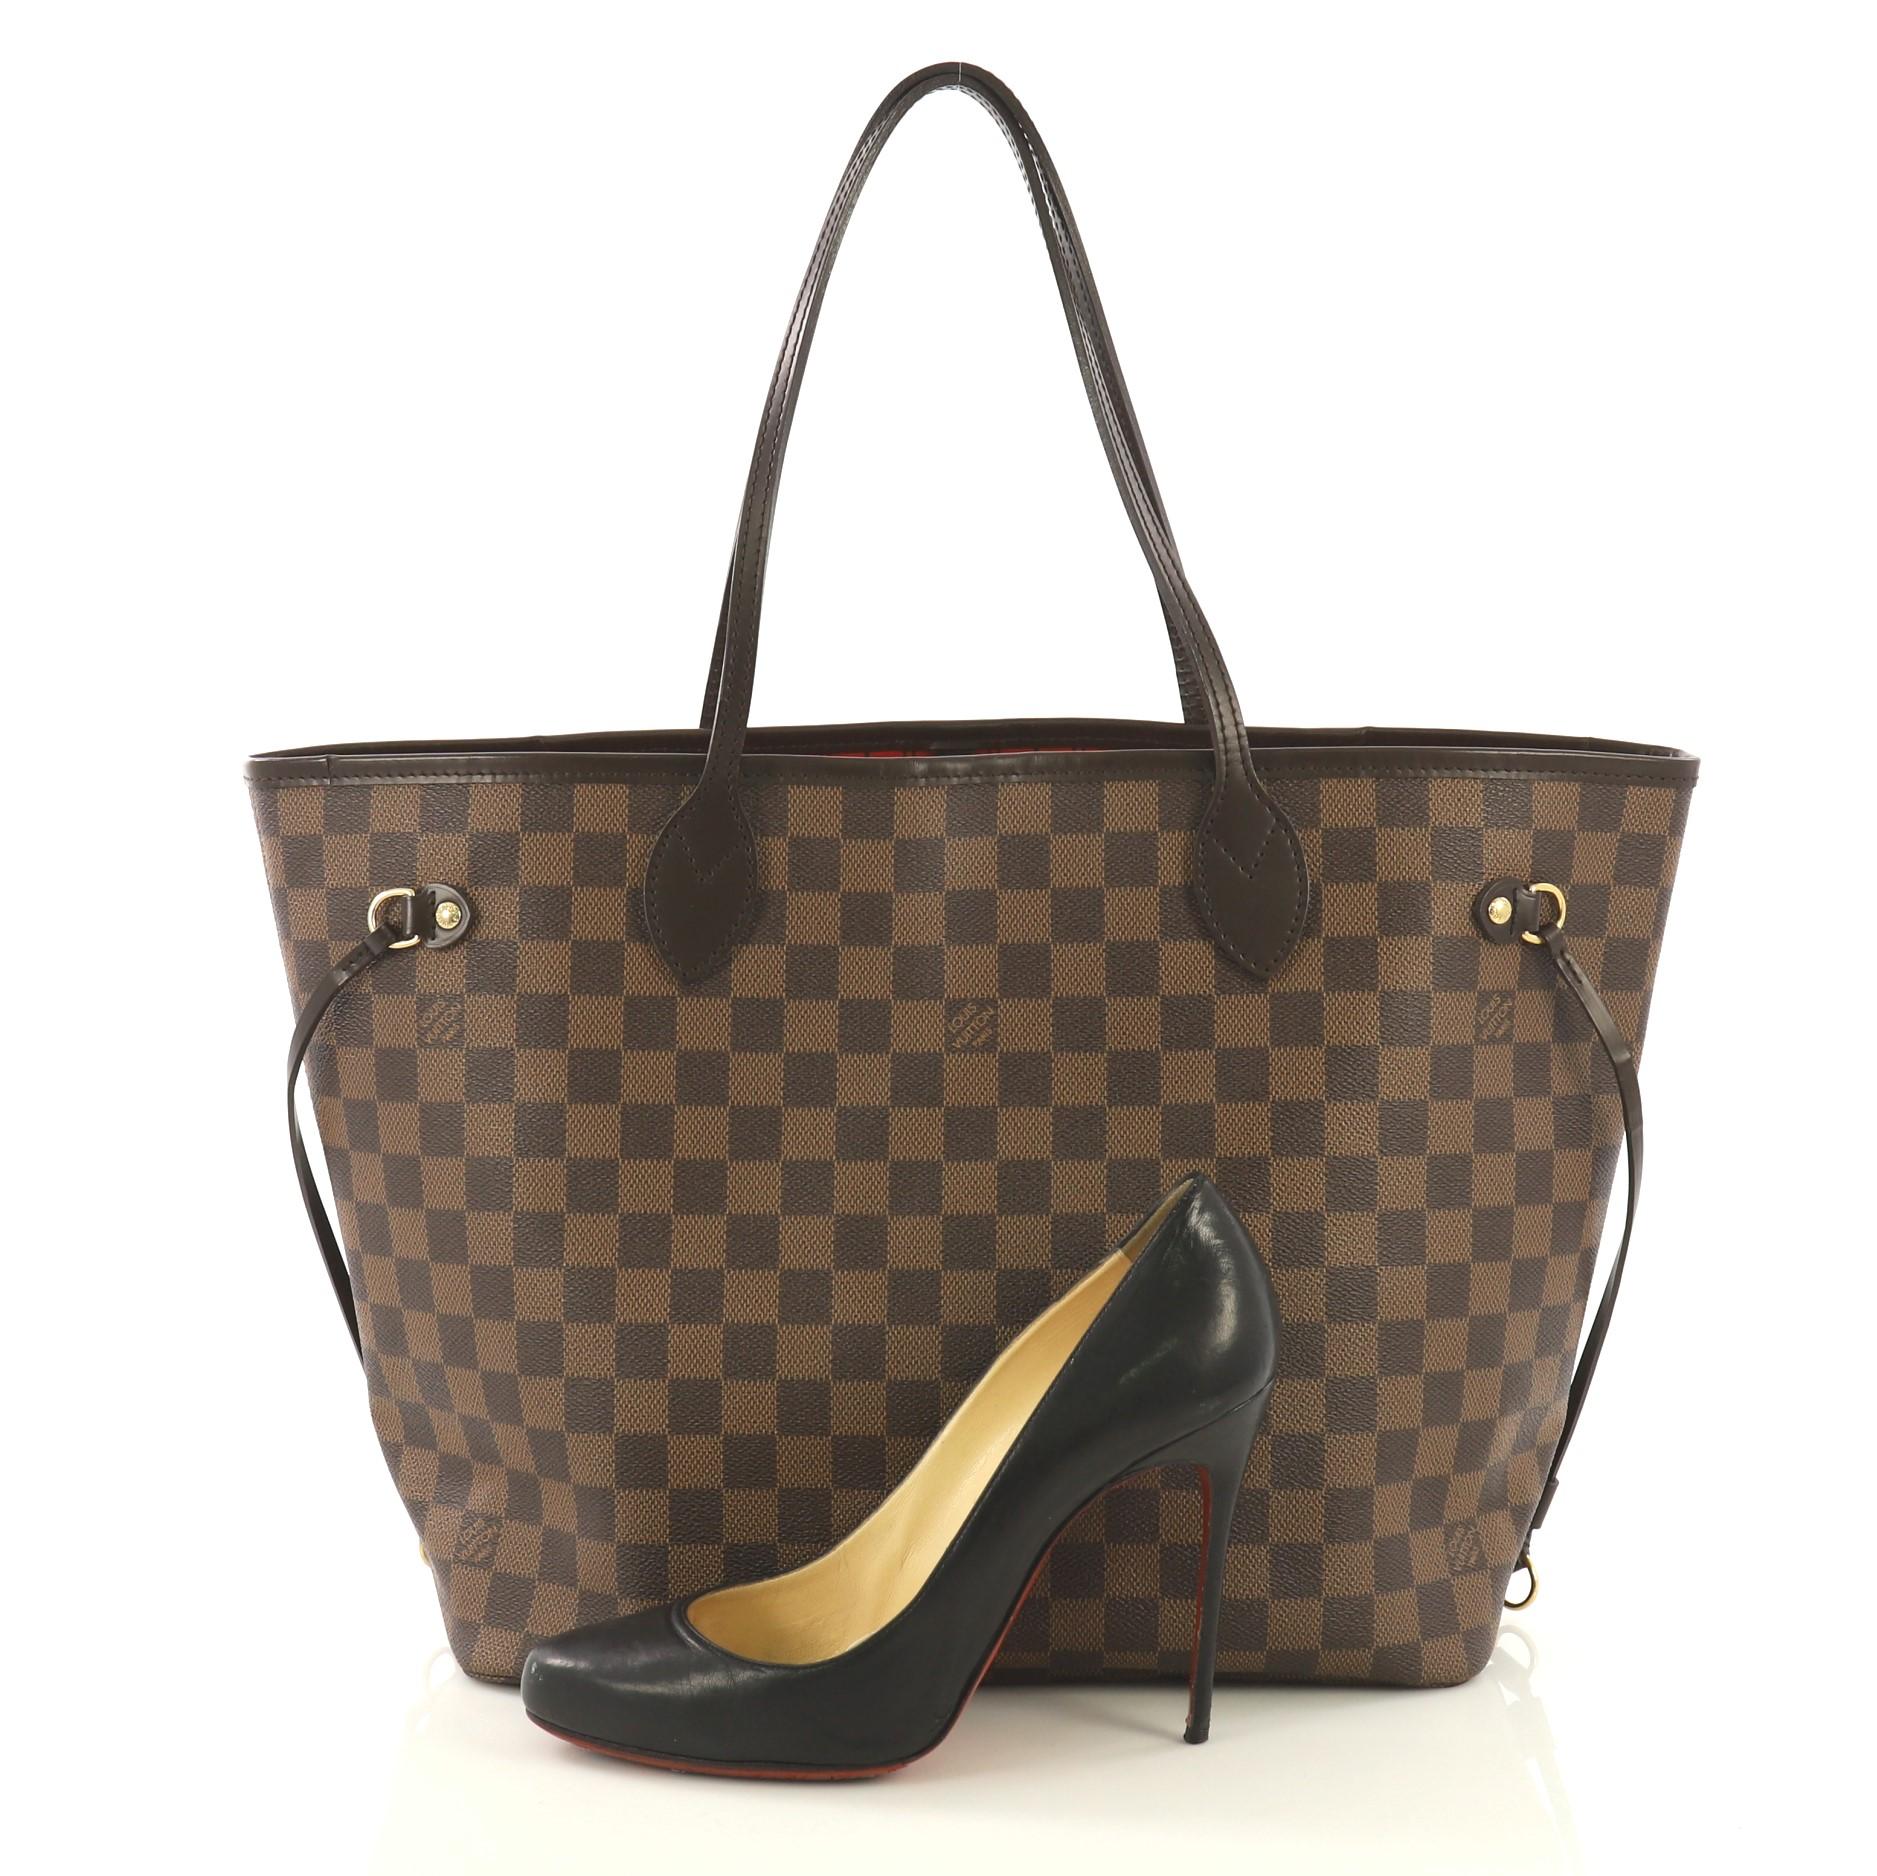 This Louis Vuitton Neverfull Tote Damier MM, crafted in damier ebene coated canvas, features dual slim handles, side laces, and gold-tone hardware. Its wide open top showcases a red fabric interior with a side zip pocket. Authenticity code reads: